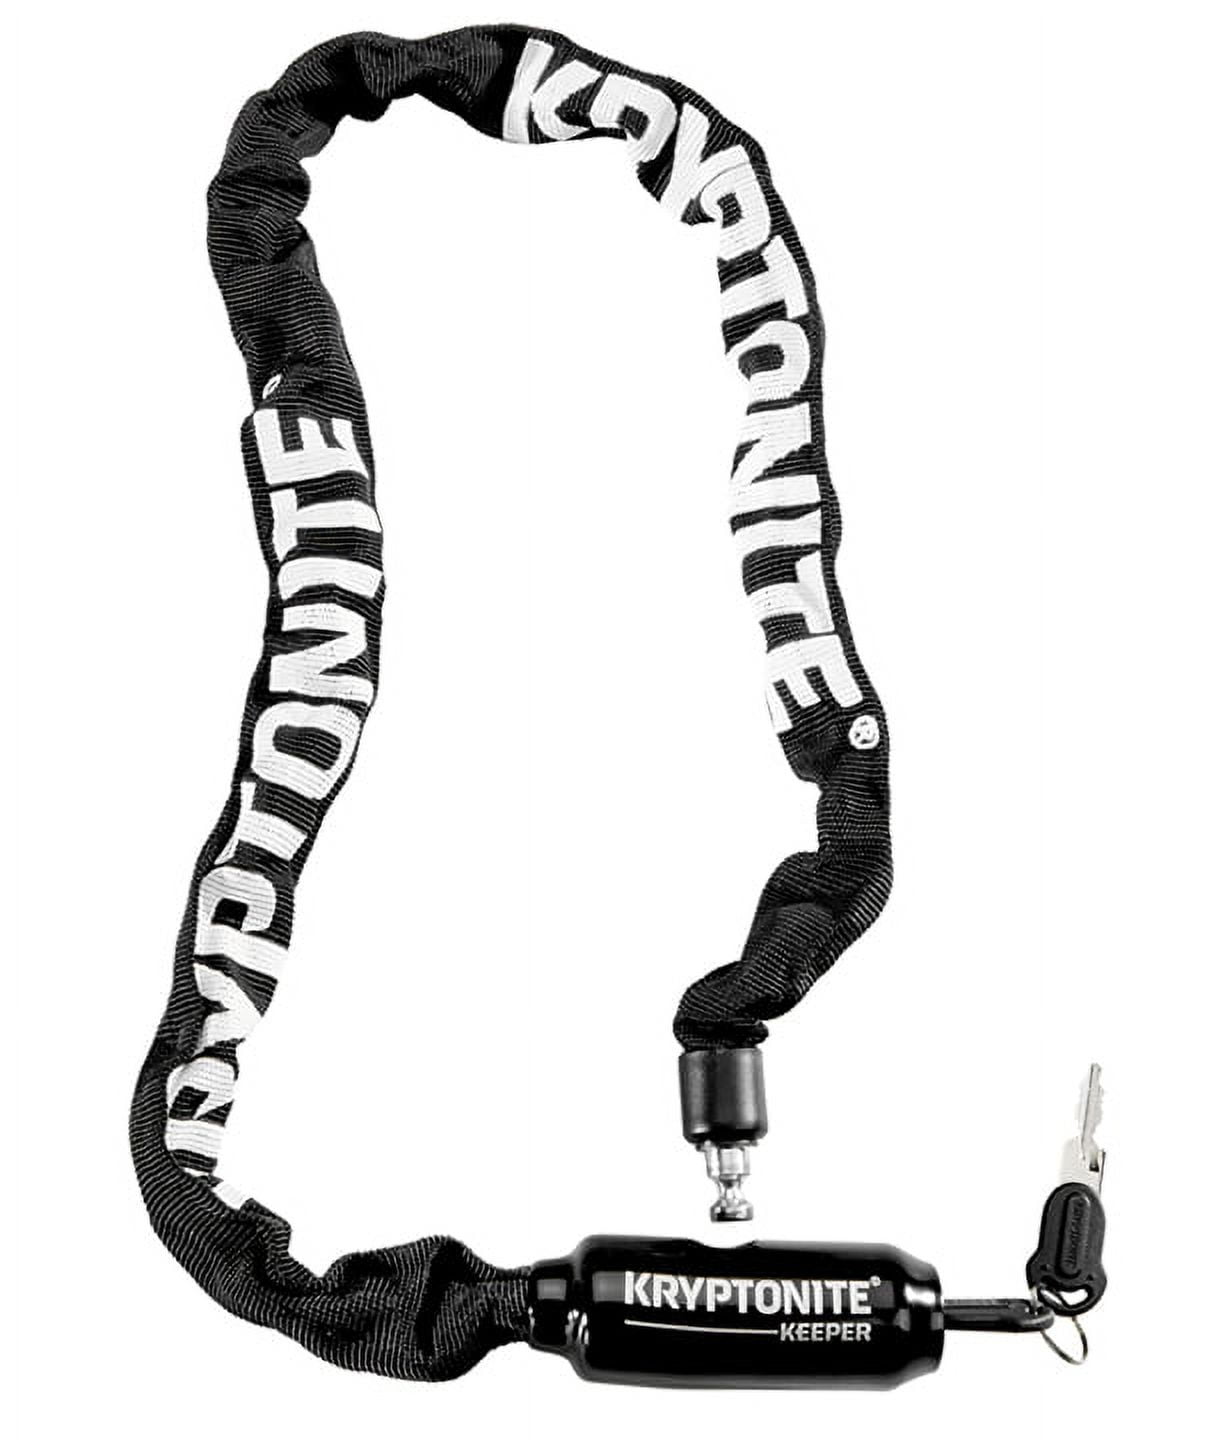 Kryptonite - Keeper 585 Combo Folding Lock - SoCal Bike - Oceanside,  Carlsbad and north San Diego county's favorite bike shop, Bicycle and ebike  rentals, sales, and service